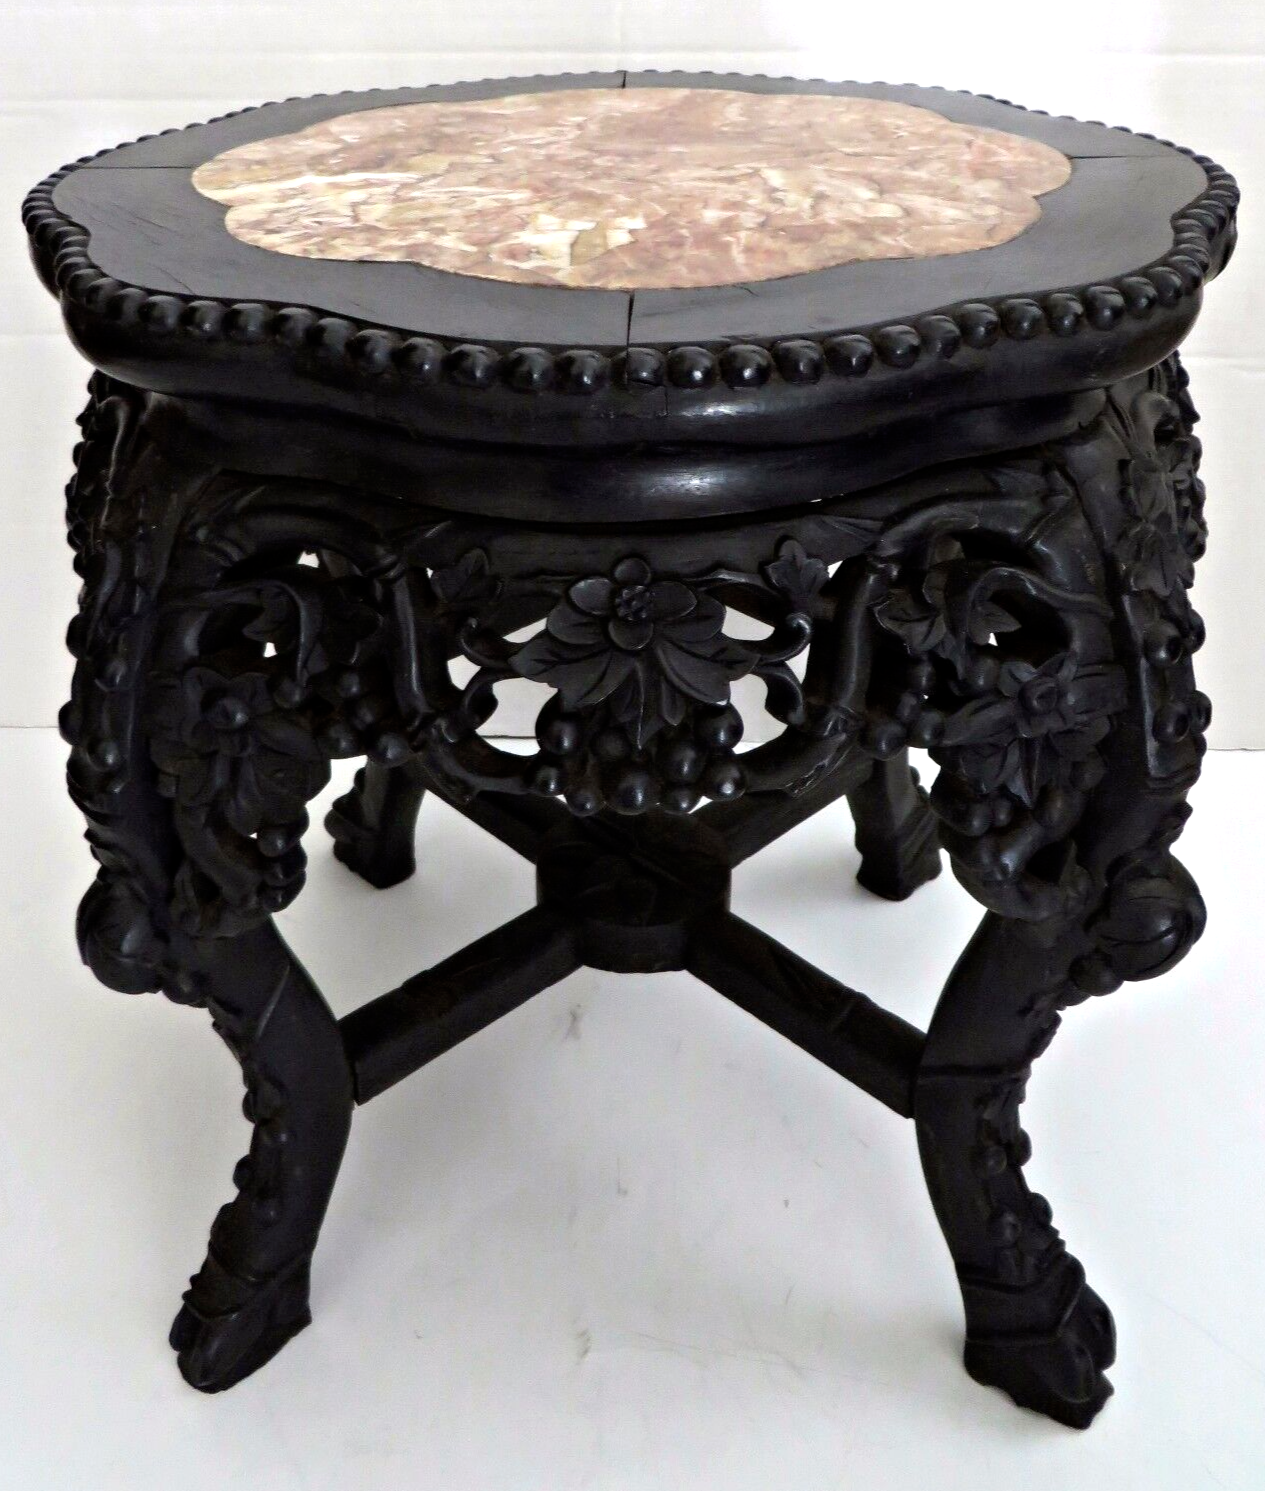 Antique 1870's Oriental Chinese Carved Wood Marble Top Side Table Plant Stand Без бренда - фотография #4